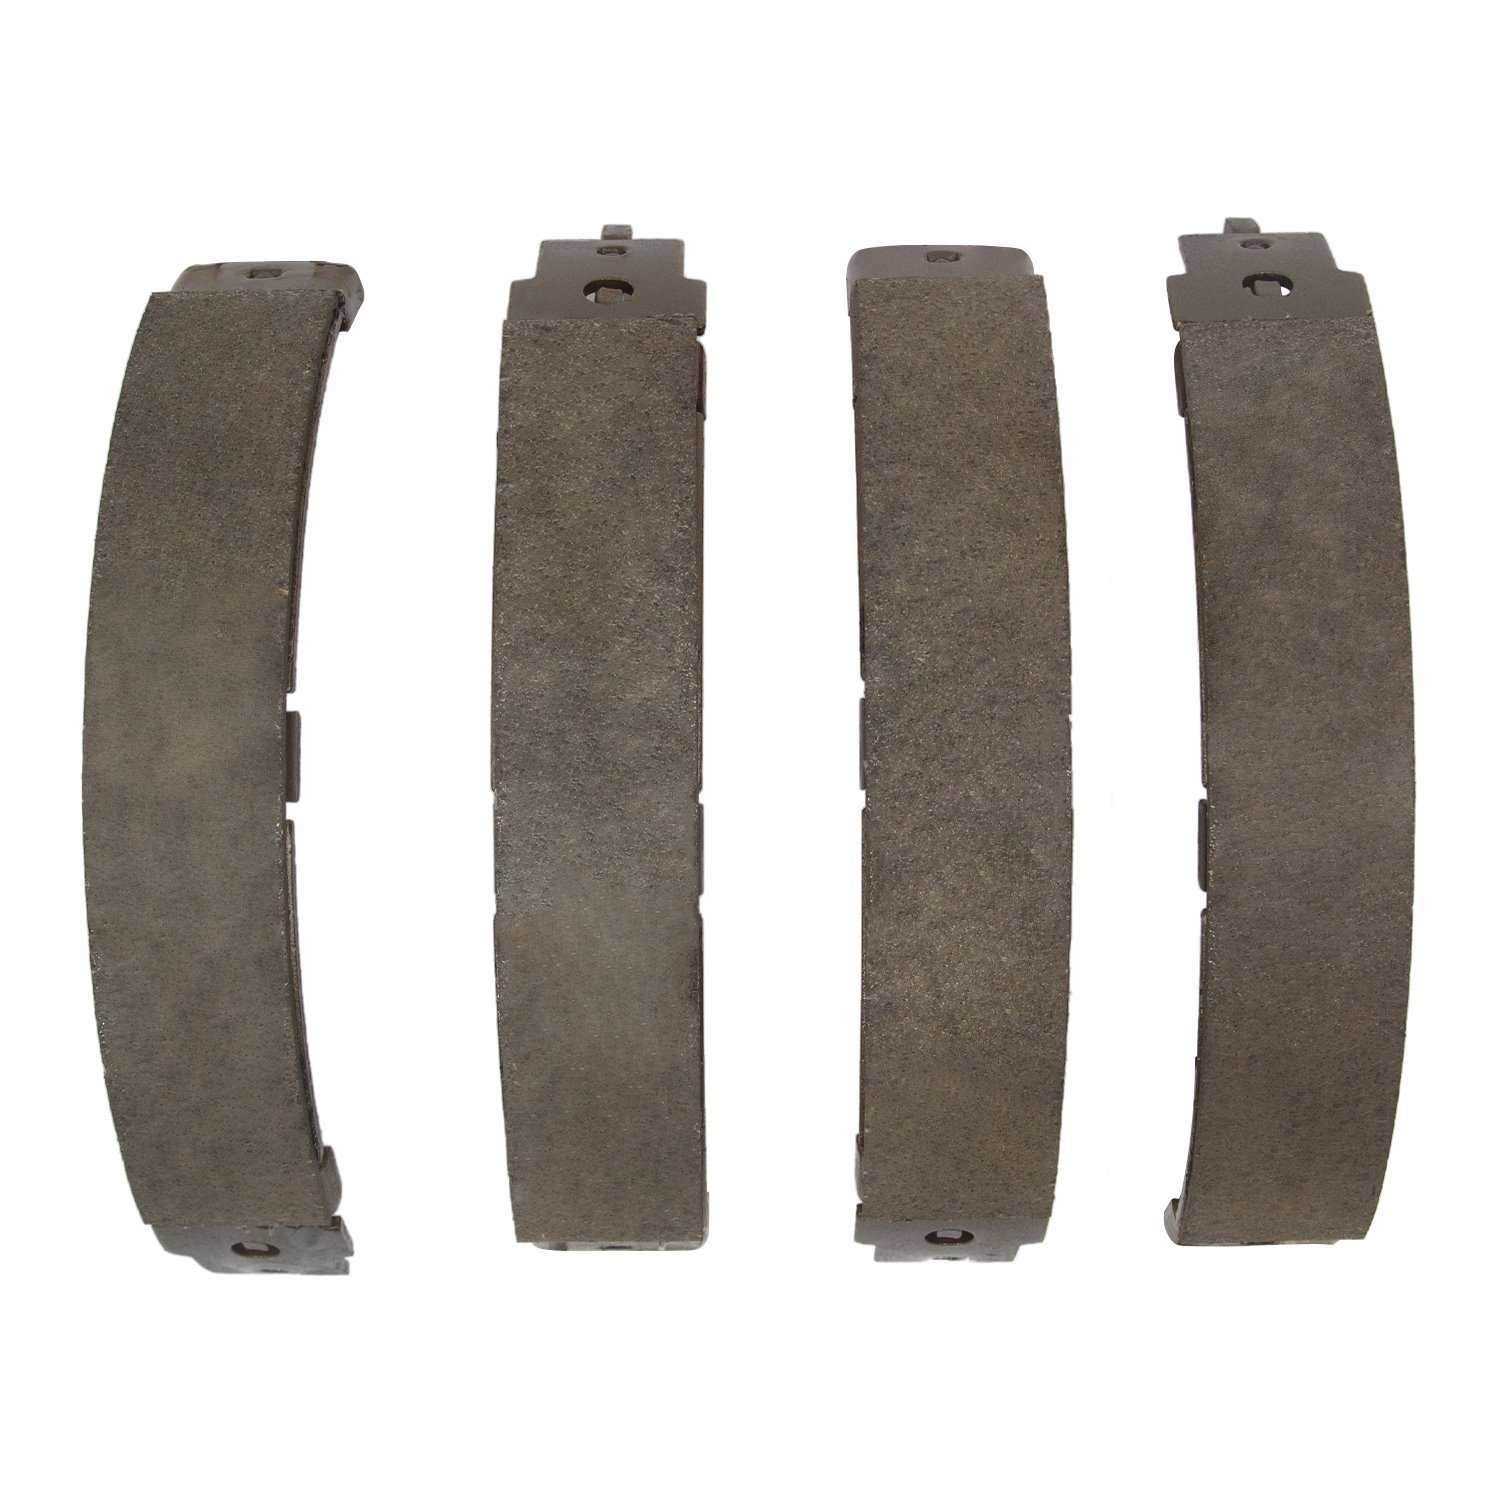 1902-0885-00 Parking Brake Shoes, 1996-1998 Ford/Lincoln/Mercury/Mazda, Position: Parking